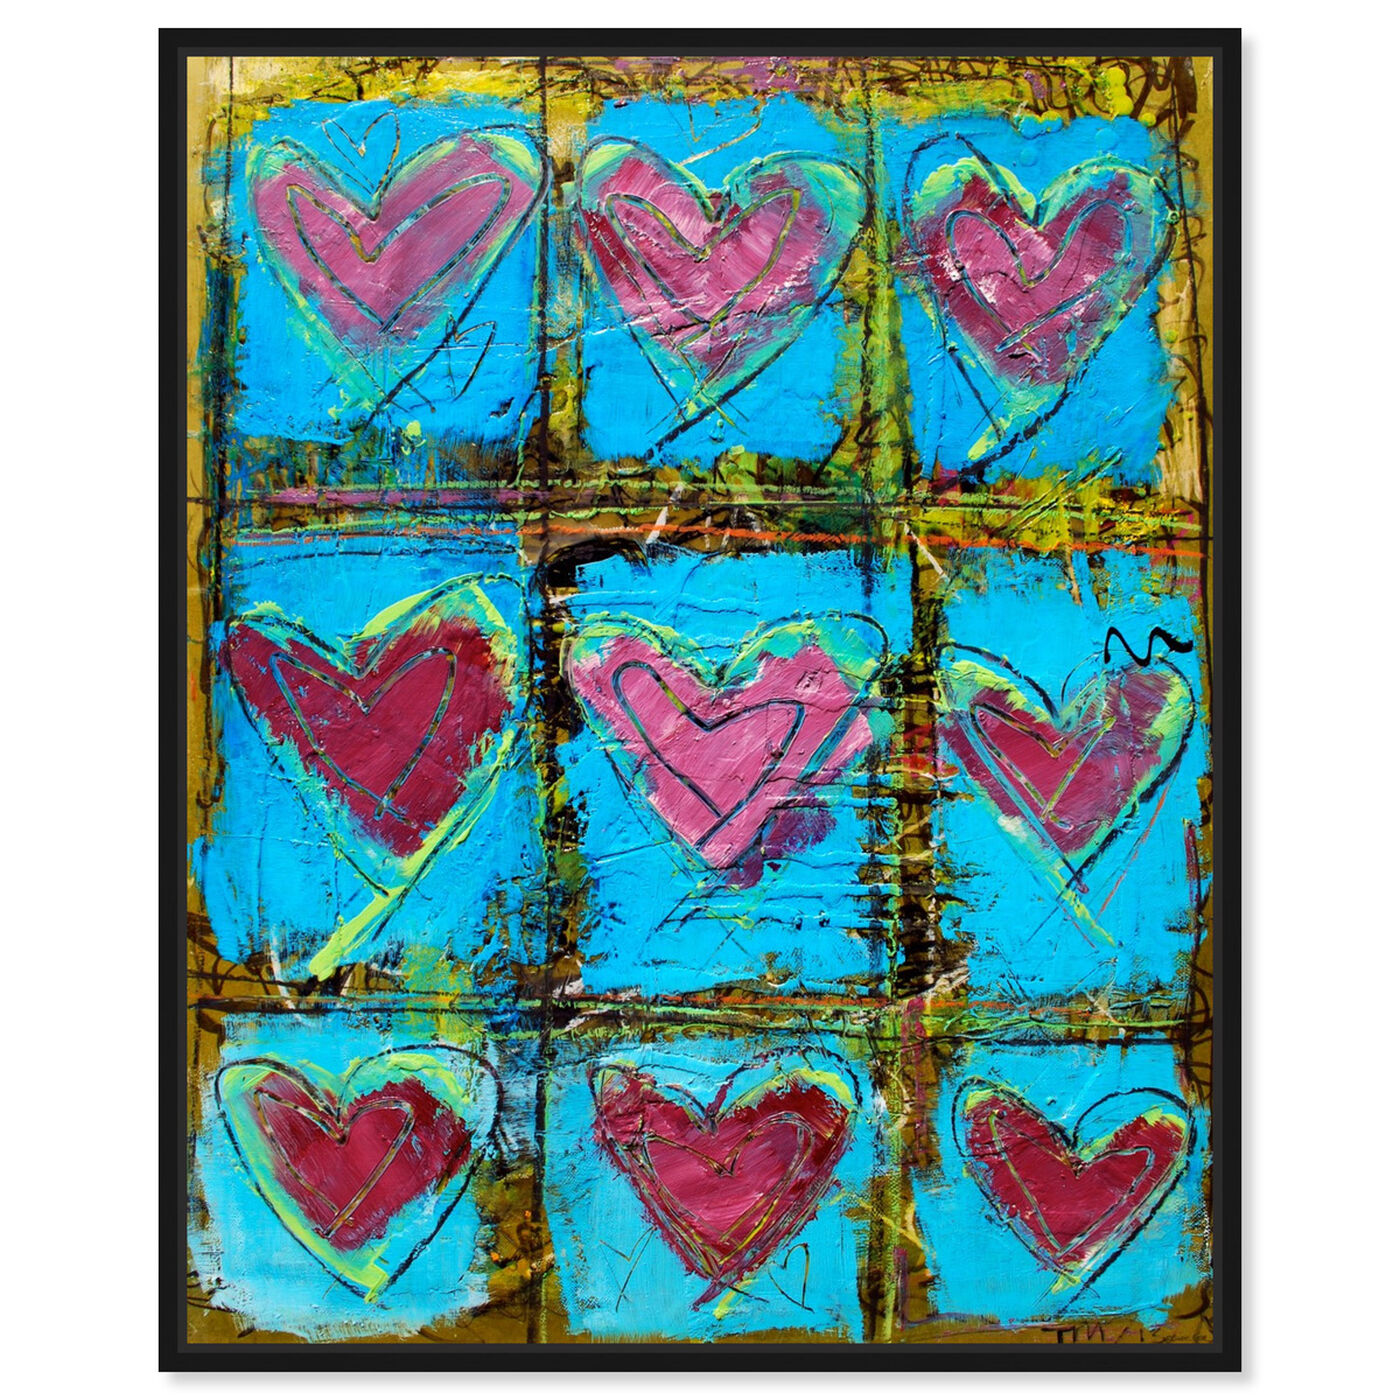 Front view of LoveTEAL by Tiago Magro featuring abstract and textures art.